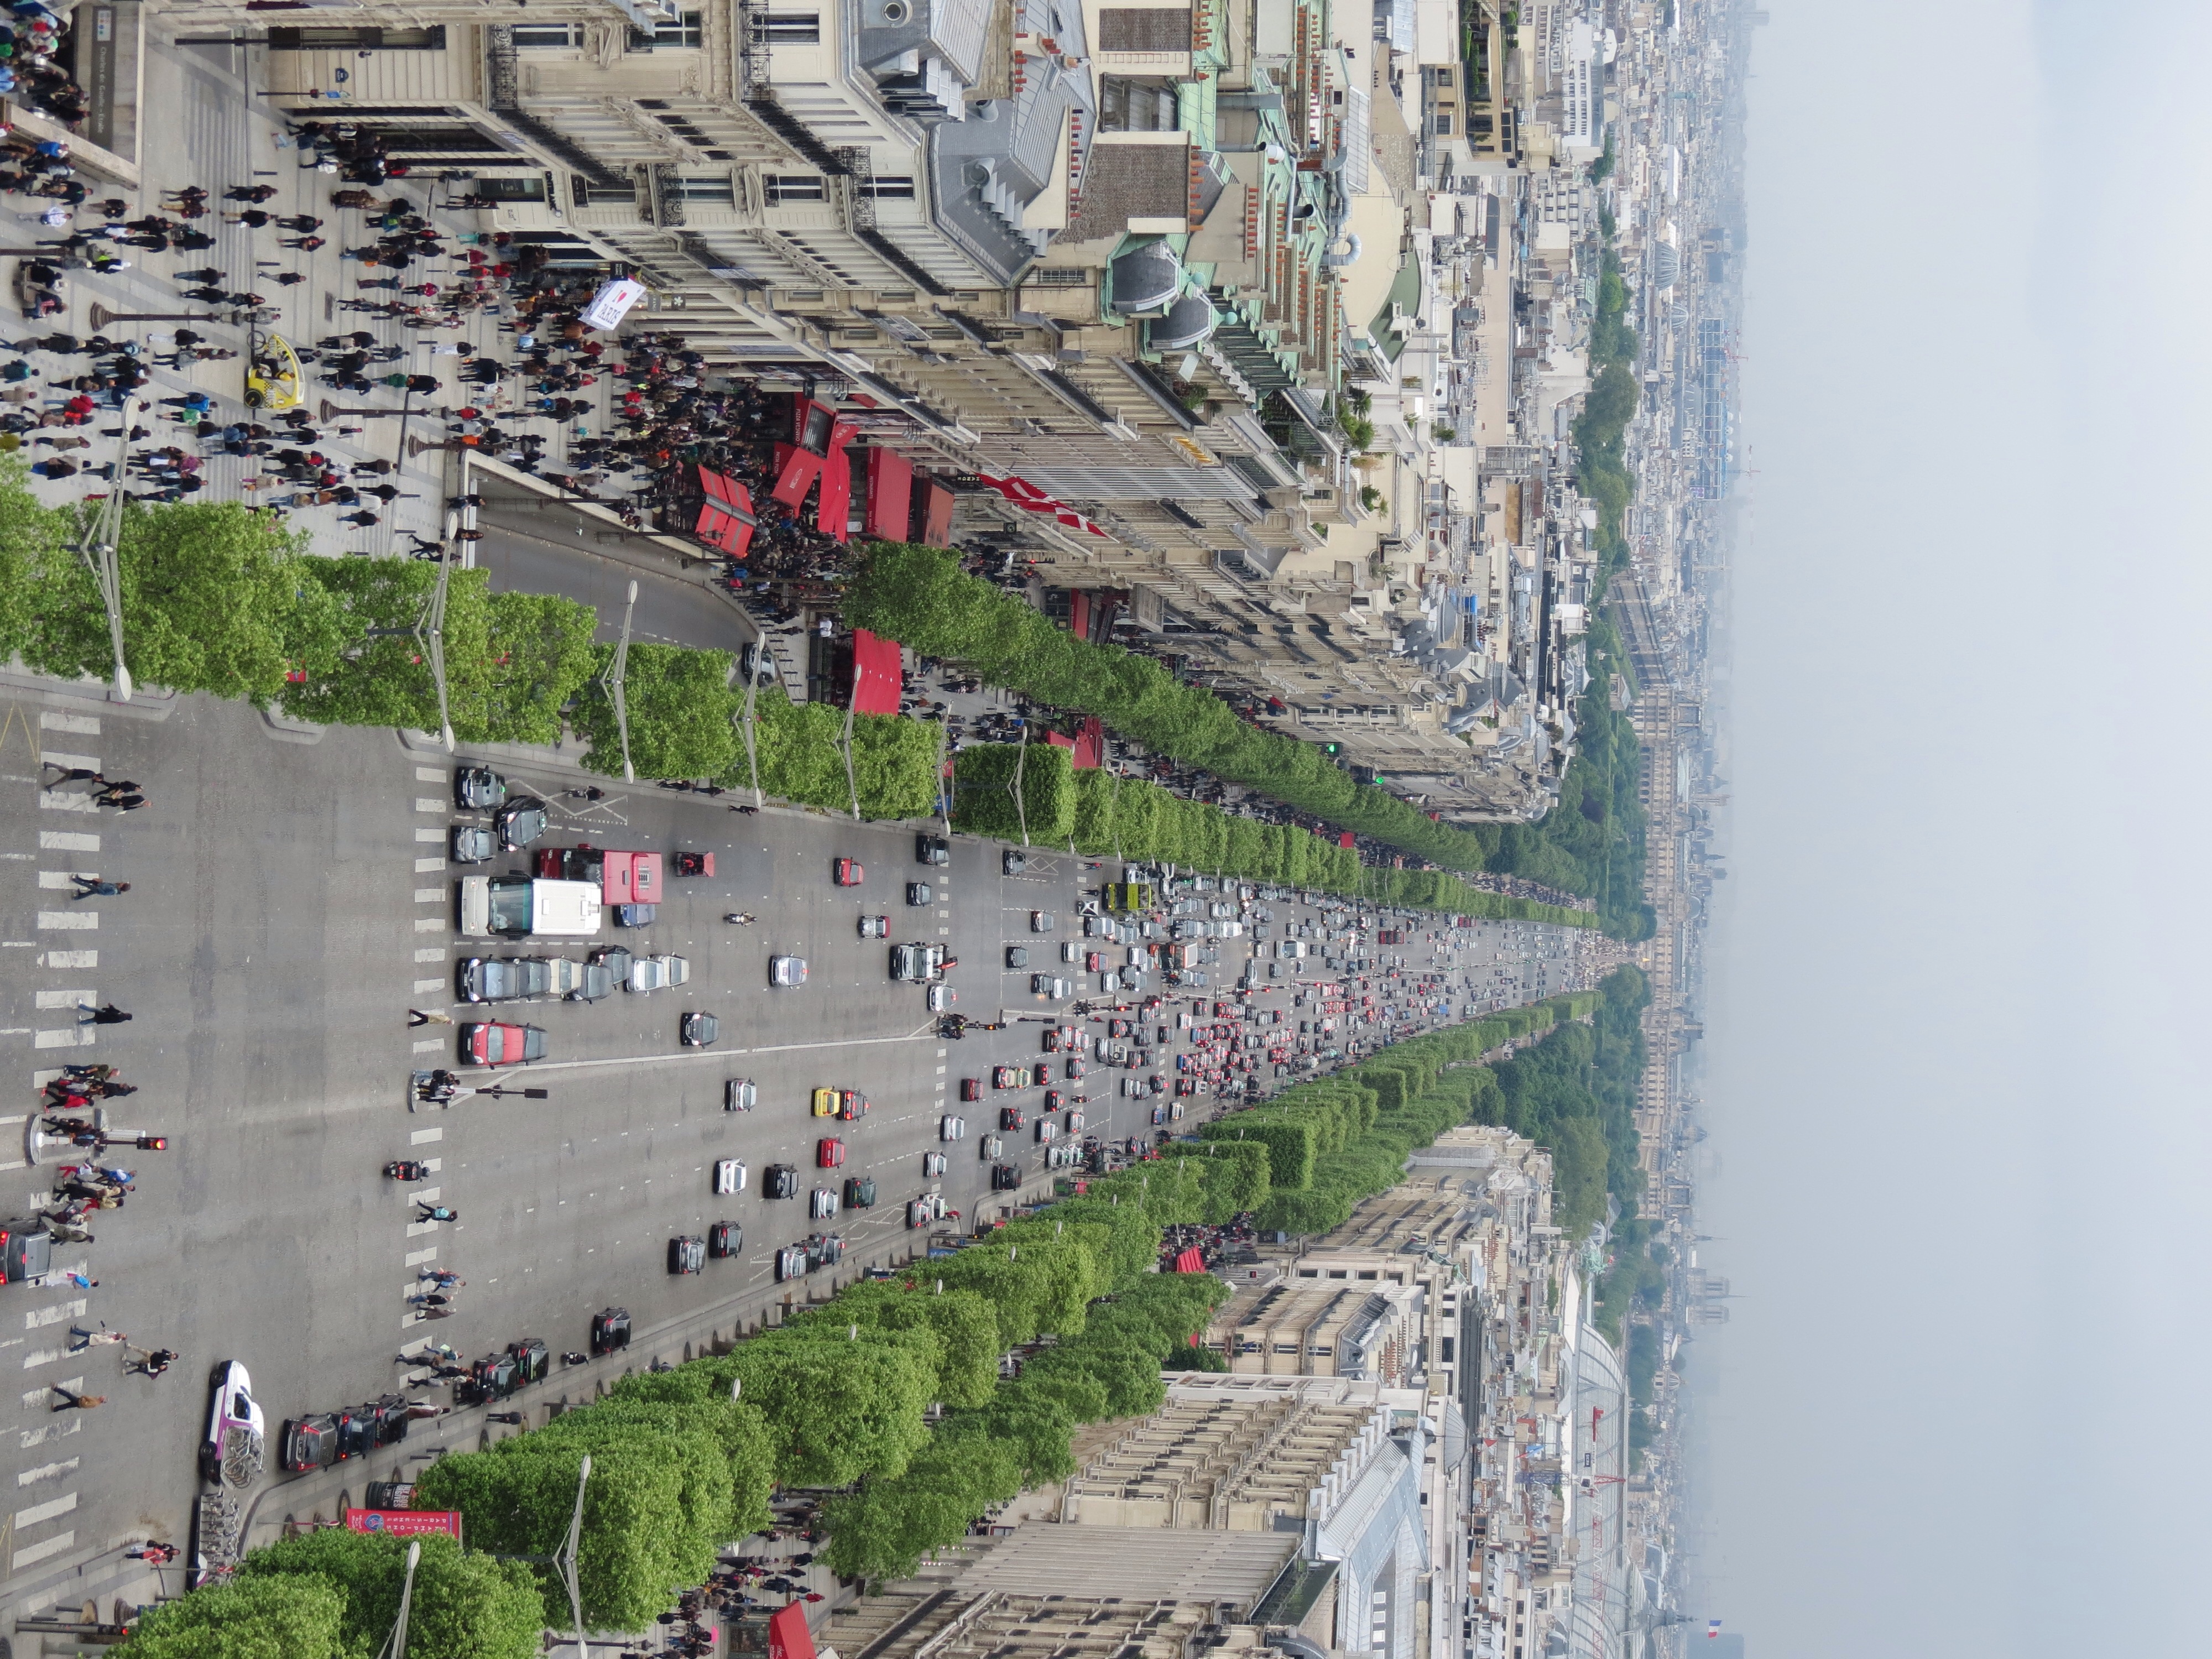 File:Avenue des Champs-Elysees, 125.jpg - Wikimedia Commons